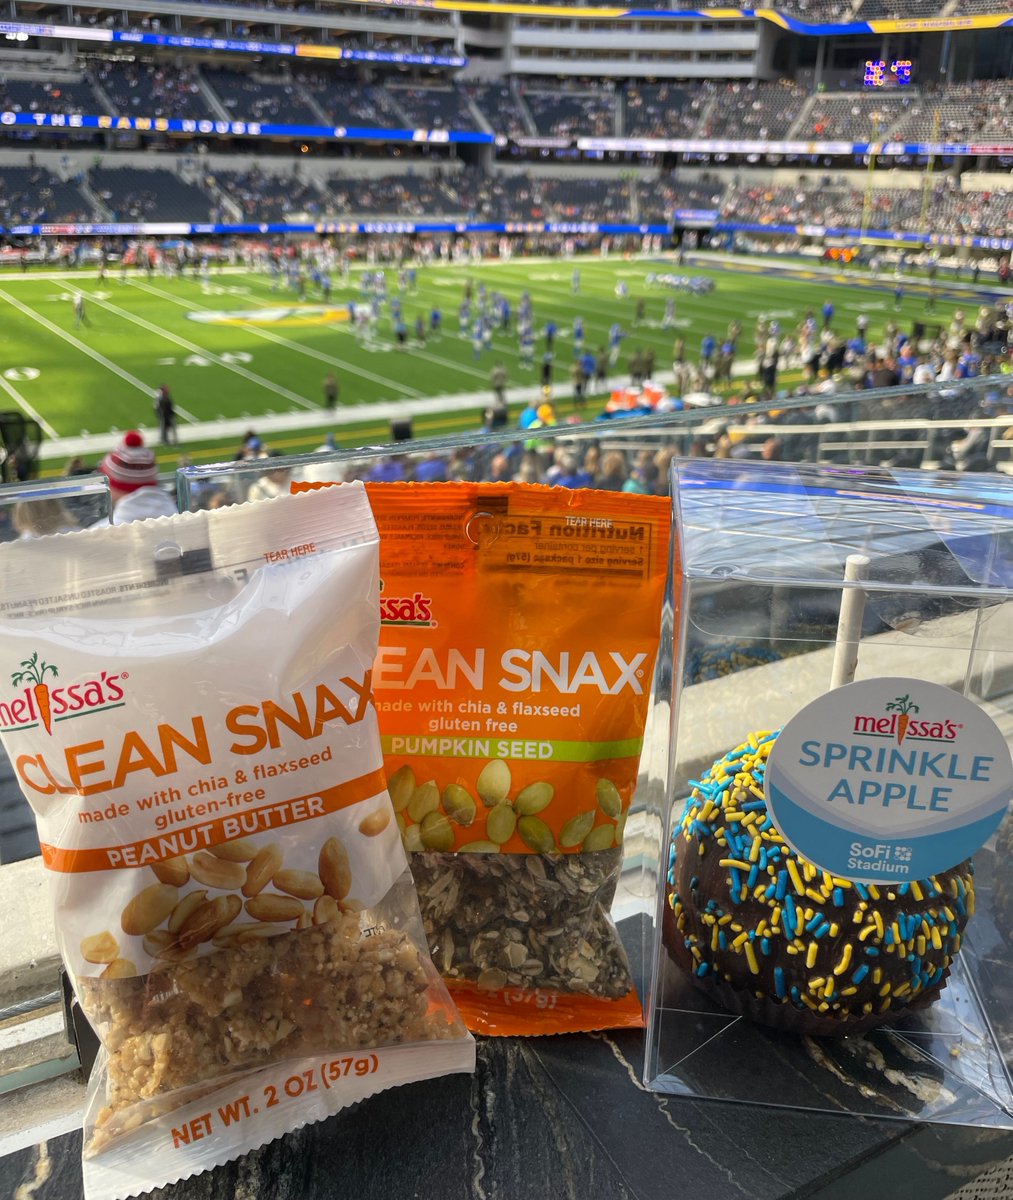 Snacking good at @SoFiStadium today! 🏈🏟️🙌

Whether you're at the #RamsHouse or homegating, let's hear what you're snacking on during today's @RamsNFL game!

#MelissasProduce #StadiumFood #CleanSnax #SeasonsBest #SoFiStadium #WASvsLAR